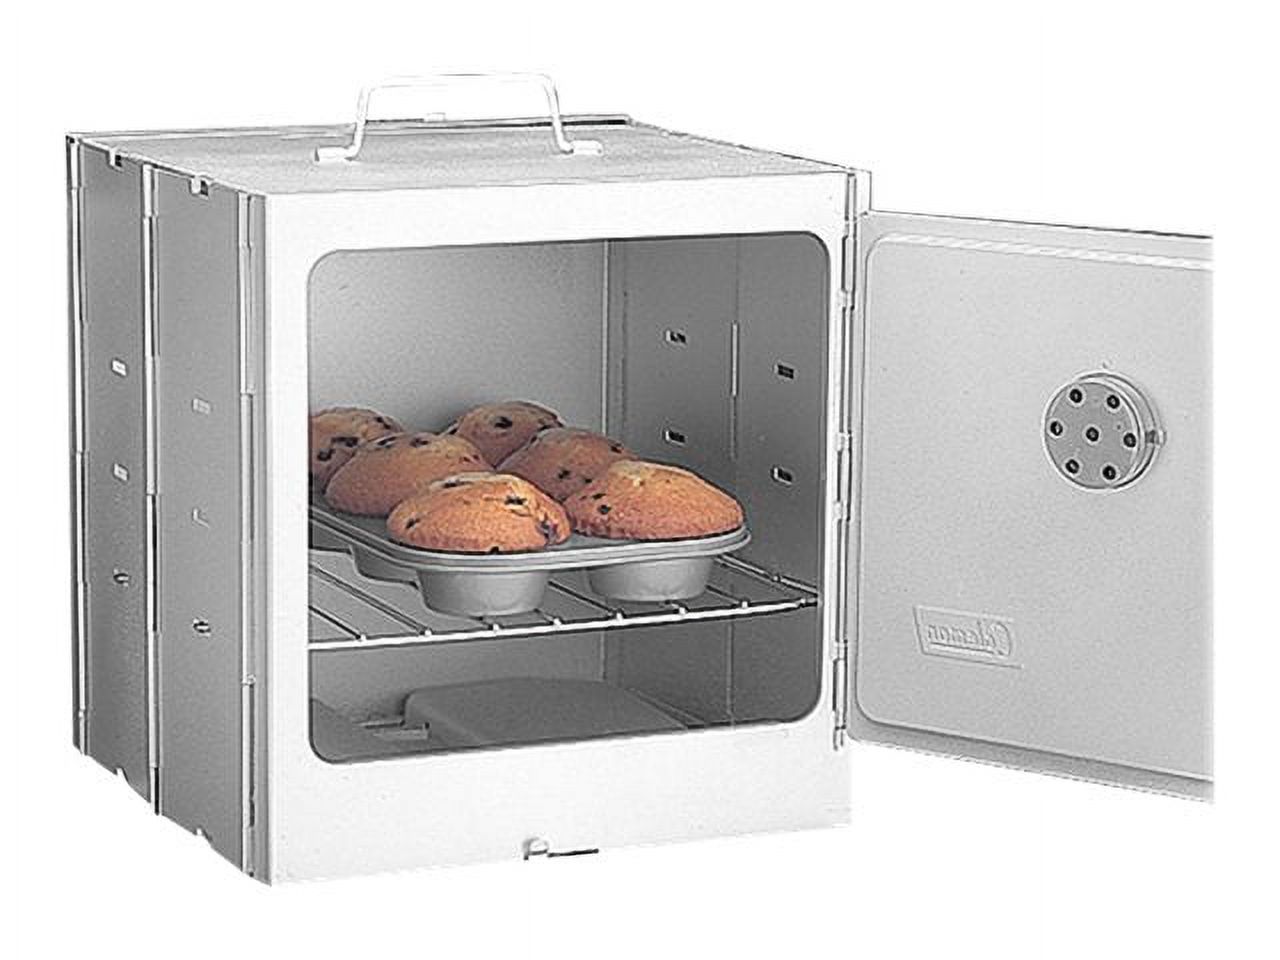 Coleman Portable Camping Oven,  Fits on Coleman Propane and Liquid Fuel Camp Stoves - image 1 of 4